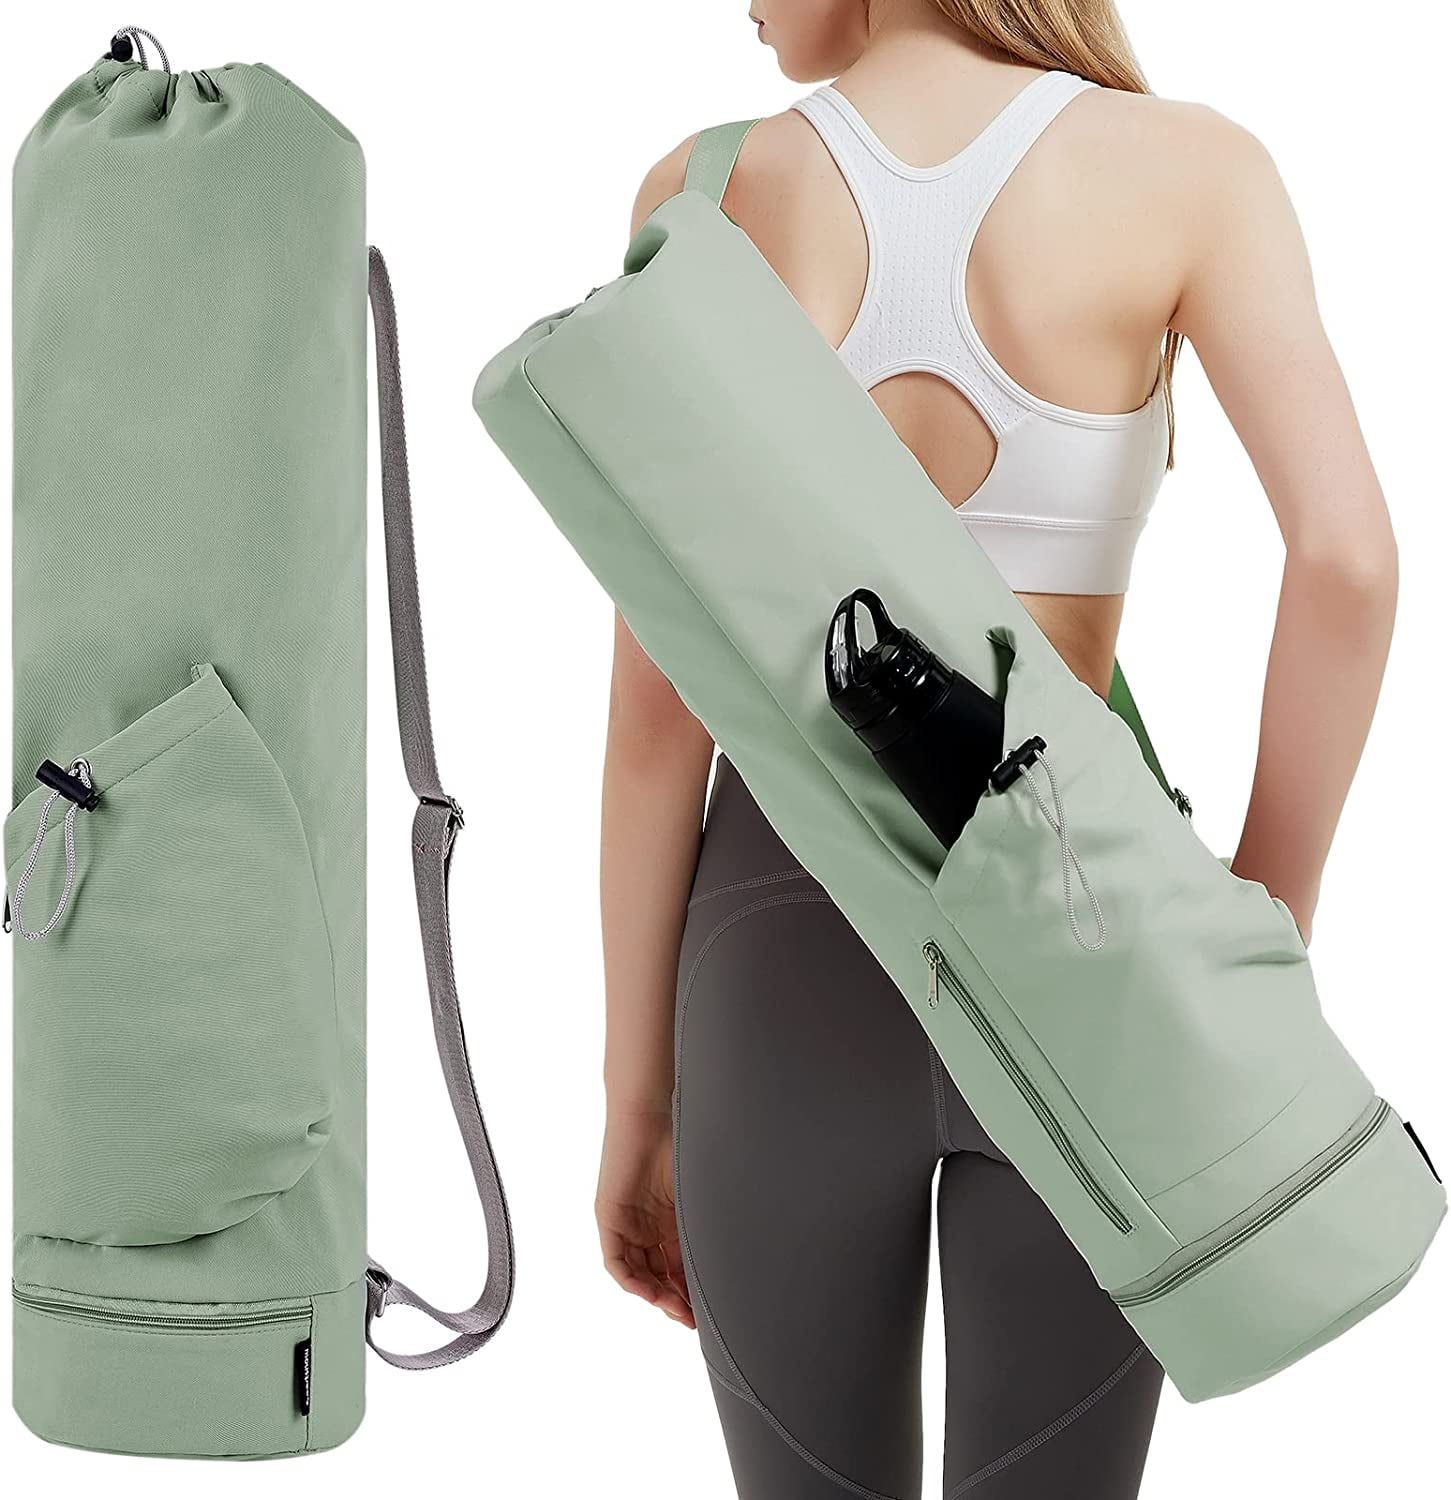 Sportsnew Yoga Mat Bag with Water Bottle Pocket and Bottom Wet Pocket,  Exercise Yoga Mat Carrier Multi-Functional Storage Bag,Mint Green 